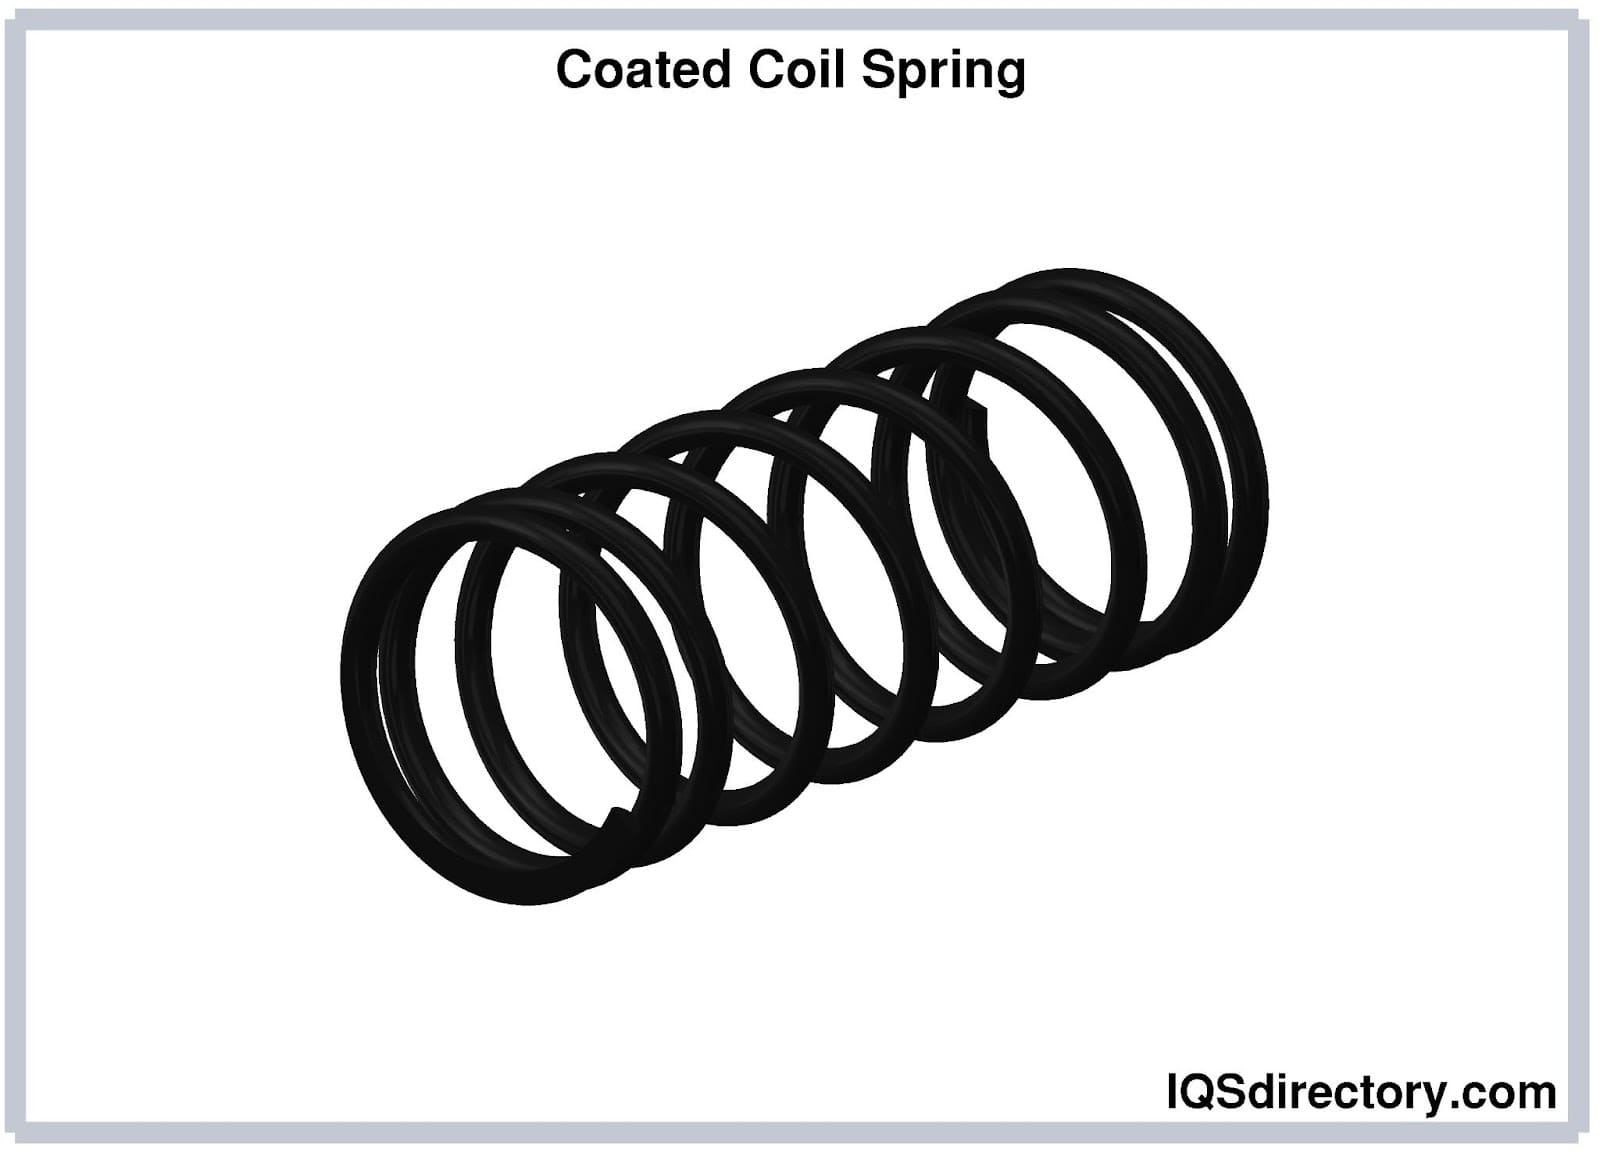 Coated Coil Spring